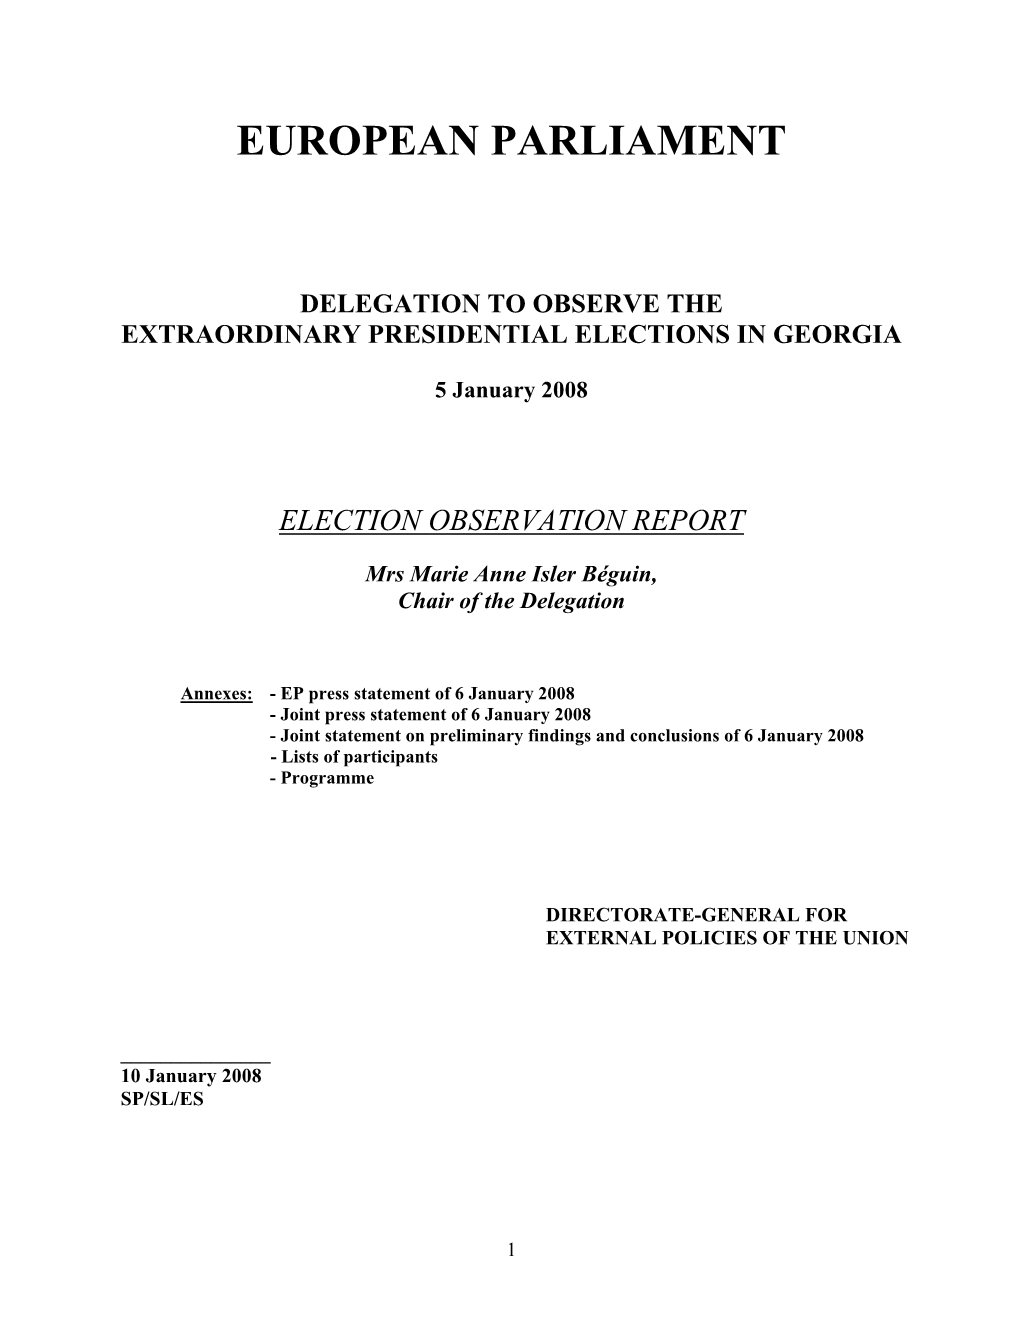 Parliamentary Elections